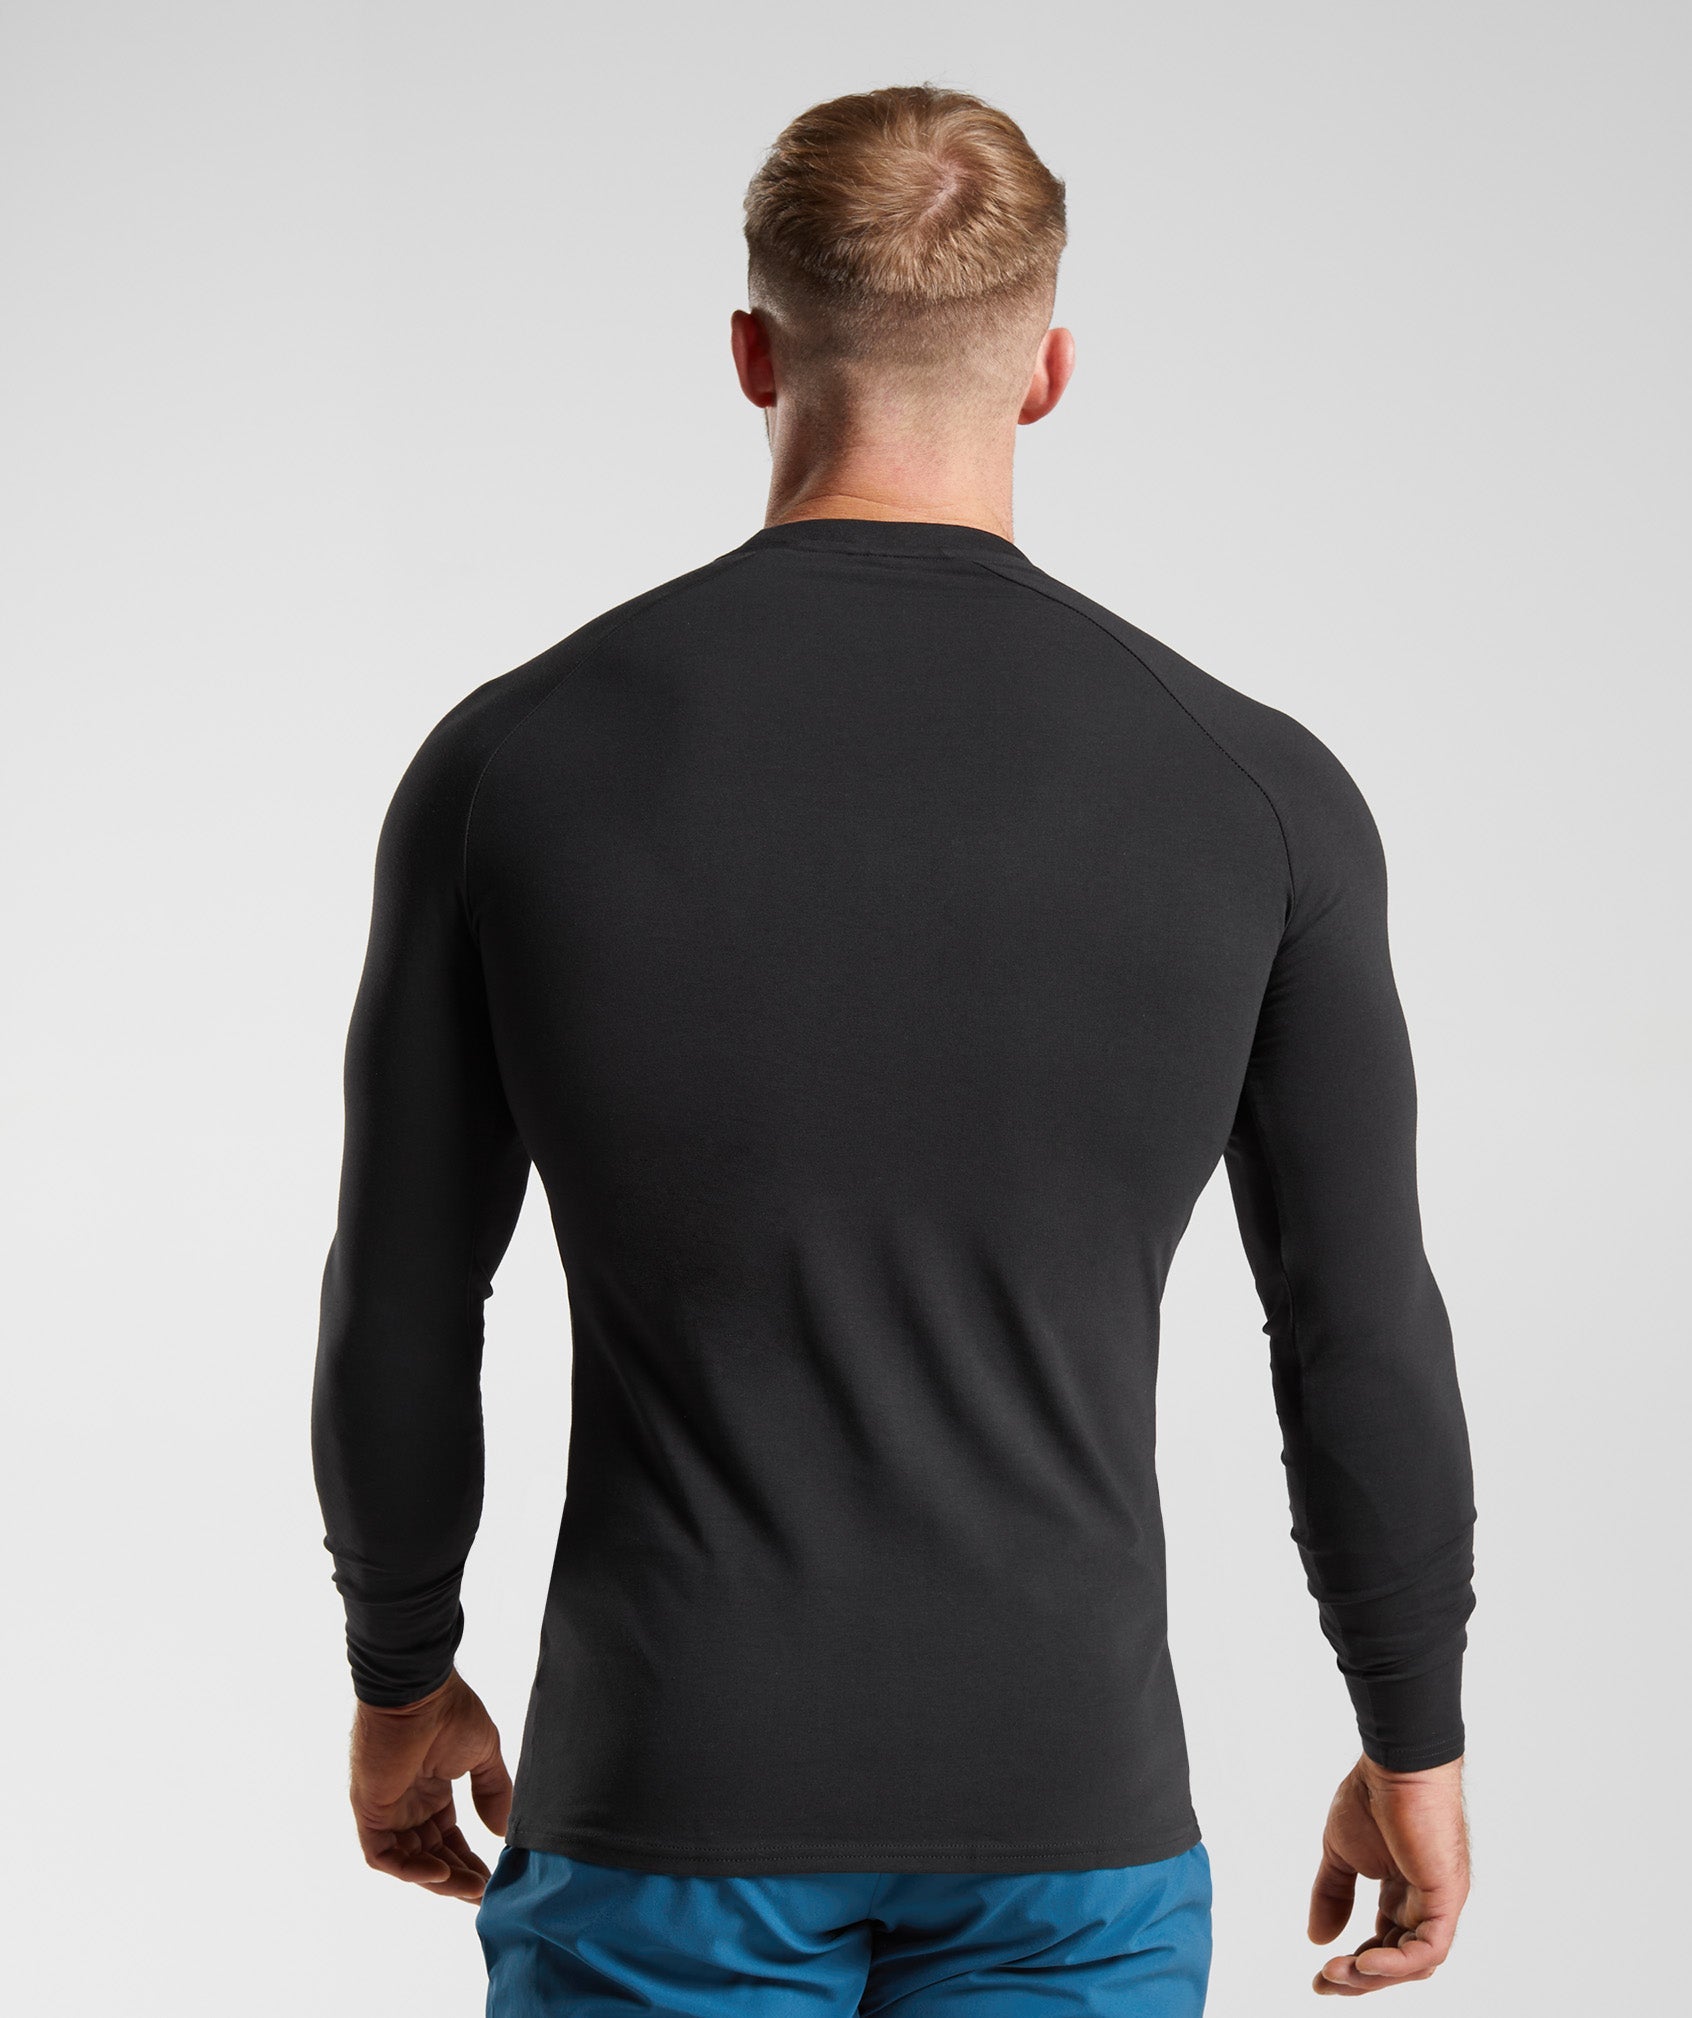 Apollo Long Sleeve T-Shirt in Black - view 2